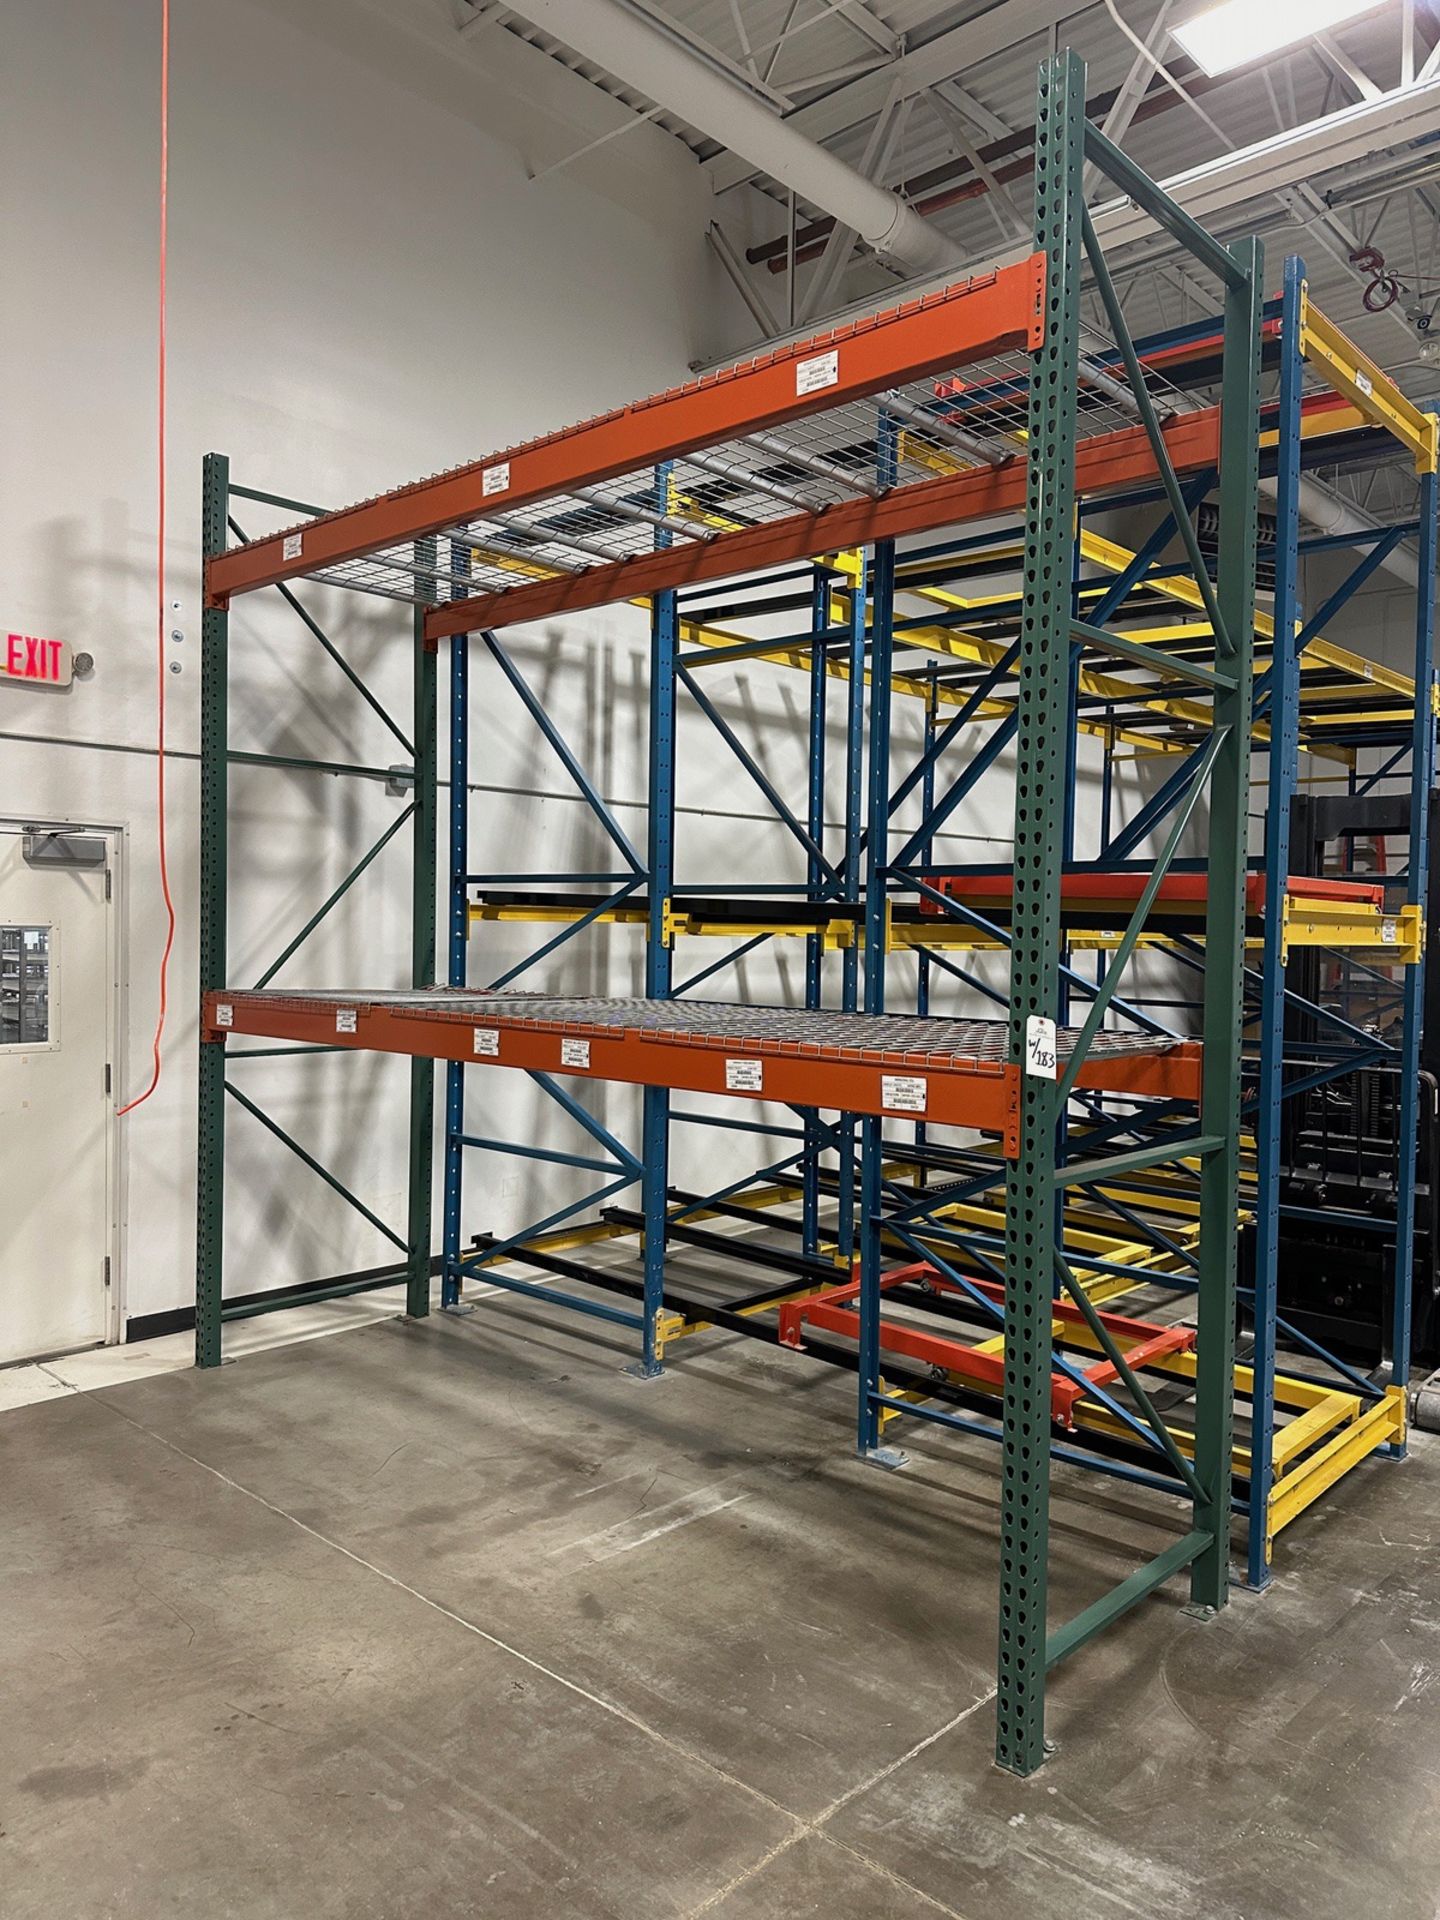 Lot of Teardrop Pallet Racking - (5) 12' x 42" Uprights - (12) 8' Crossbeams with 4 | Rig Fee $400 - Image 3 of 3